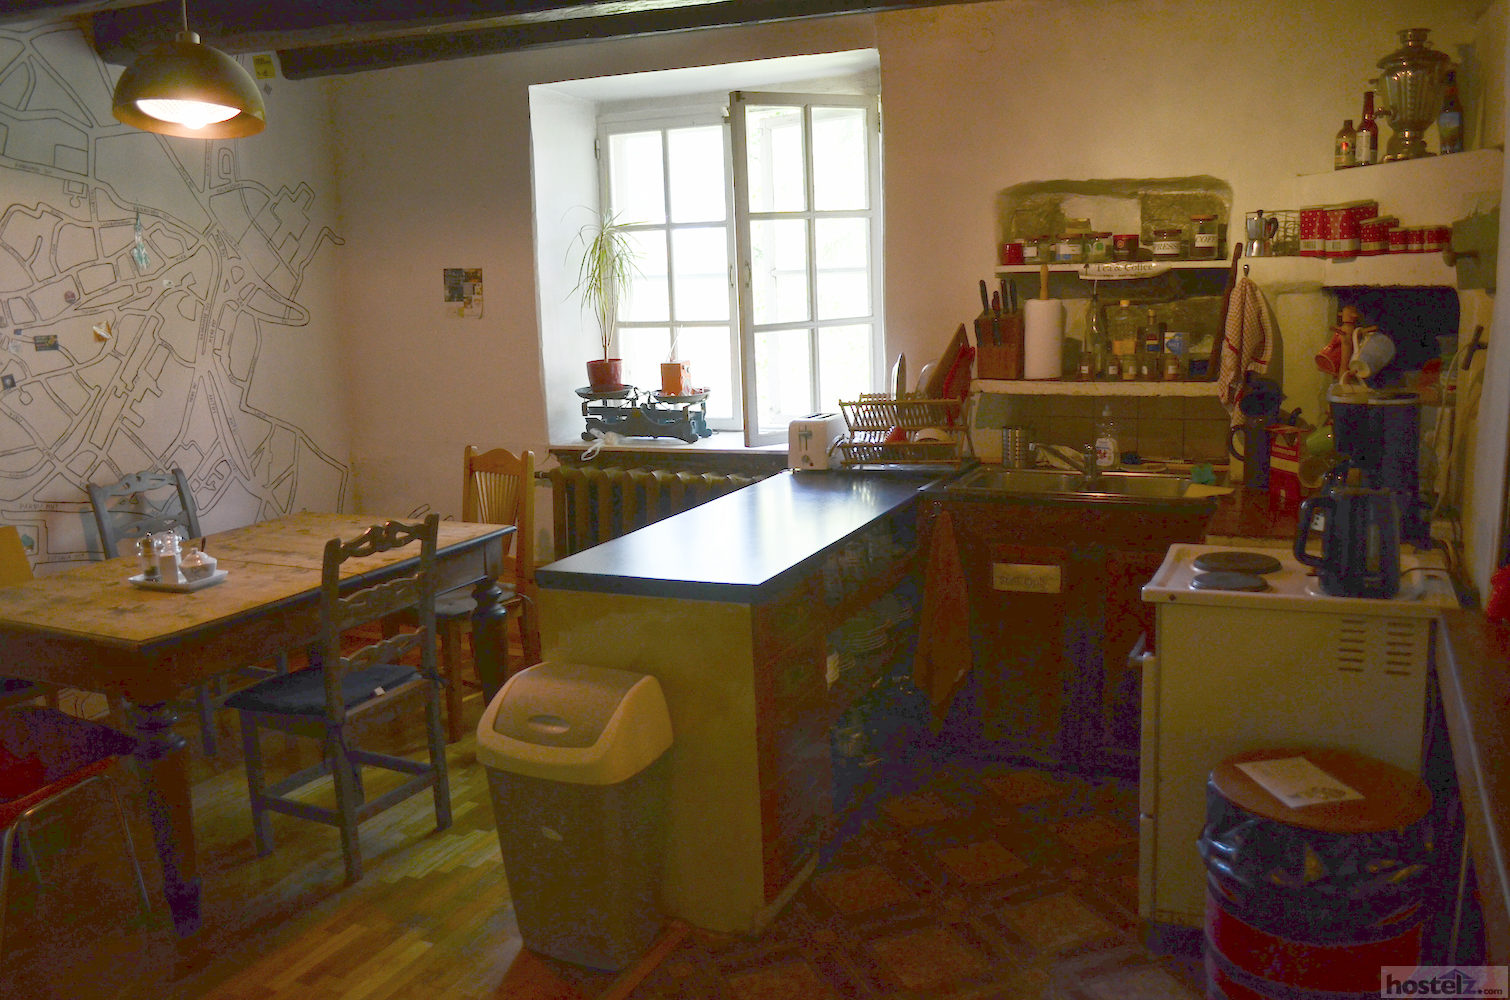 The kitchen area on the 1st floor of the hostel